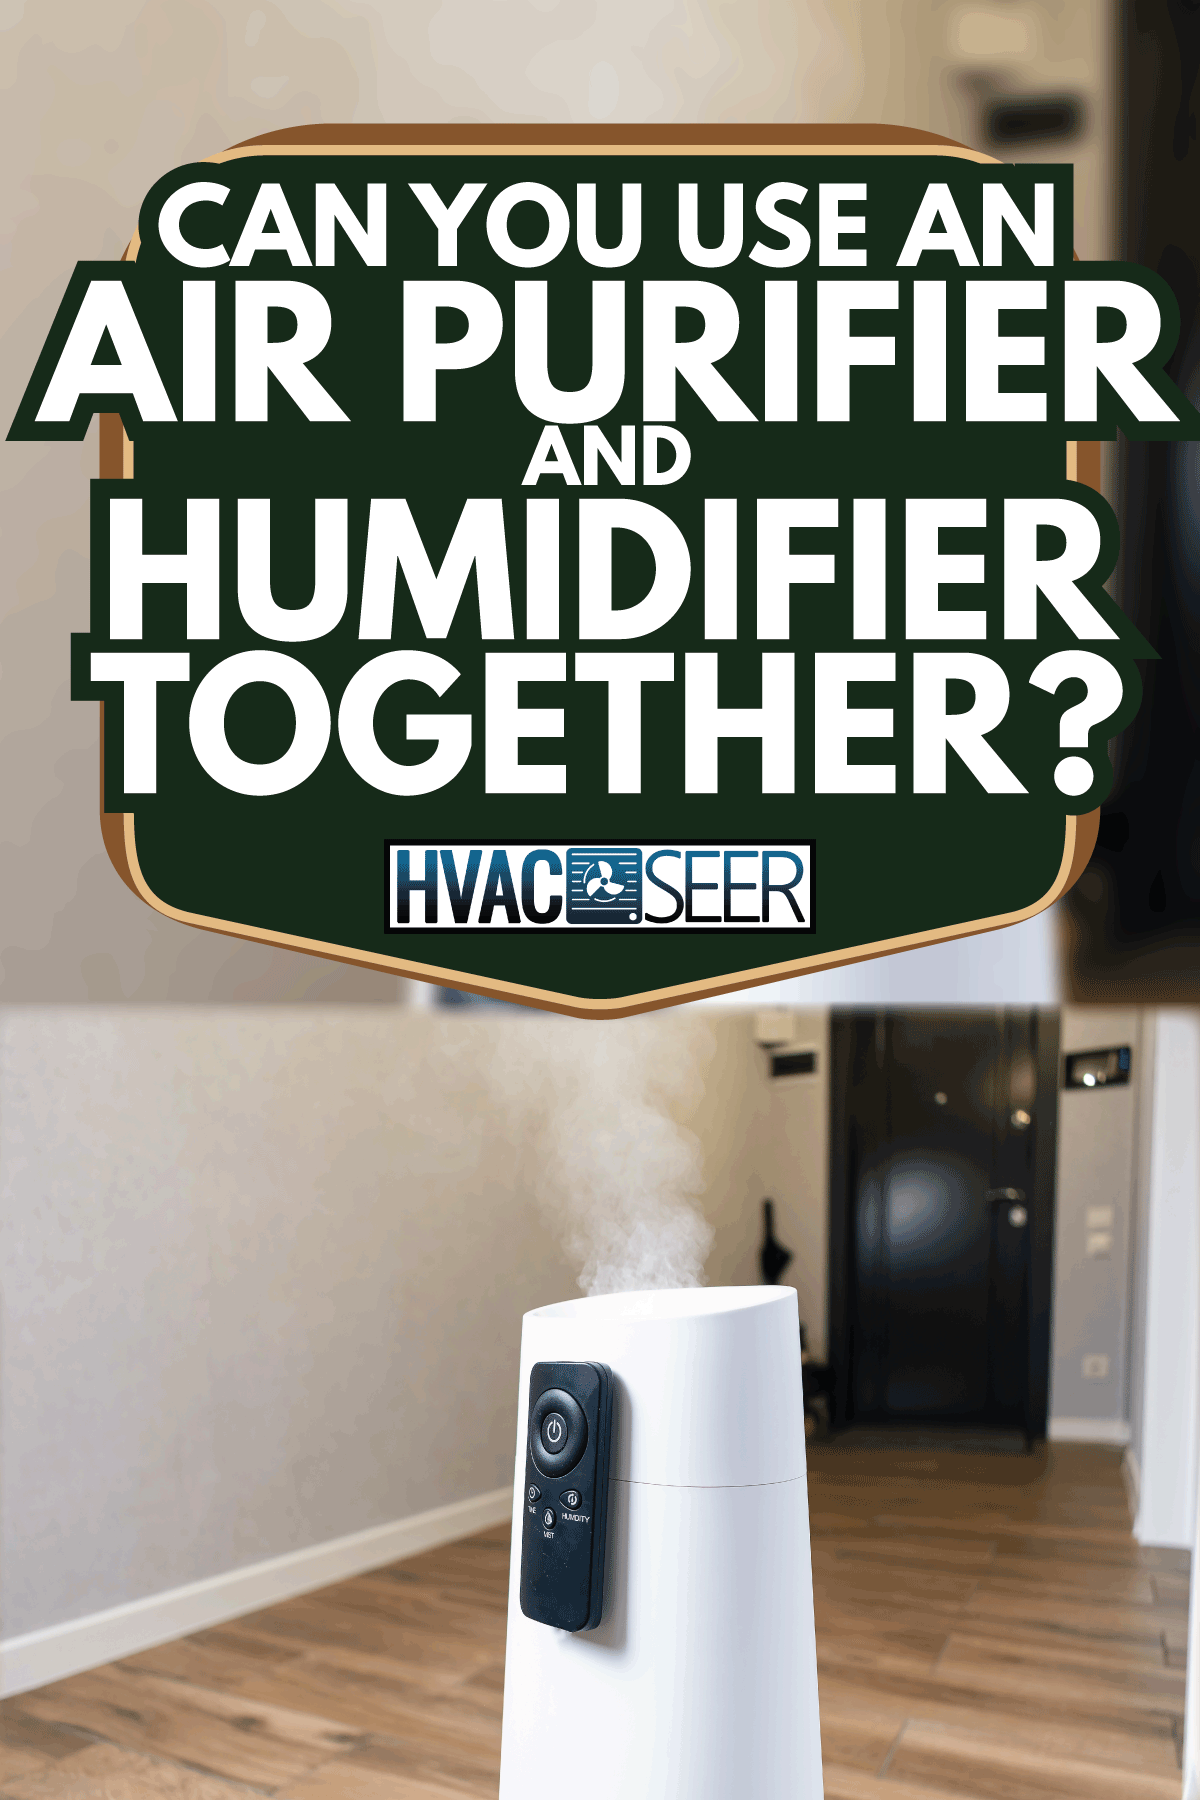 Modern white humidifier with remote in the house. Can You Use An Air Purifier And Humidifier Together